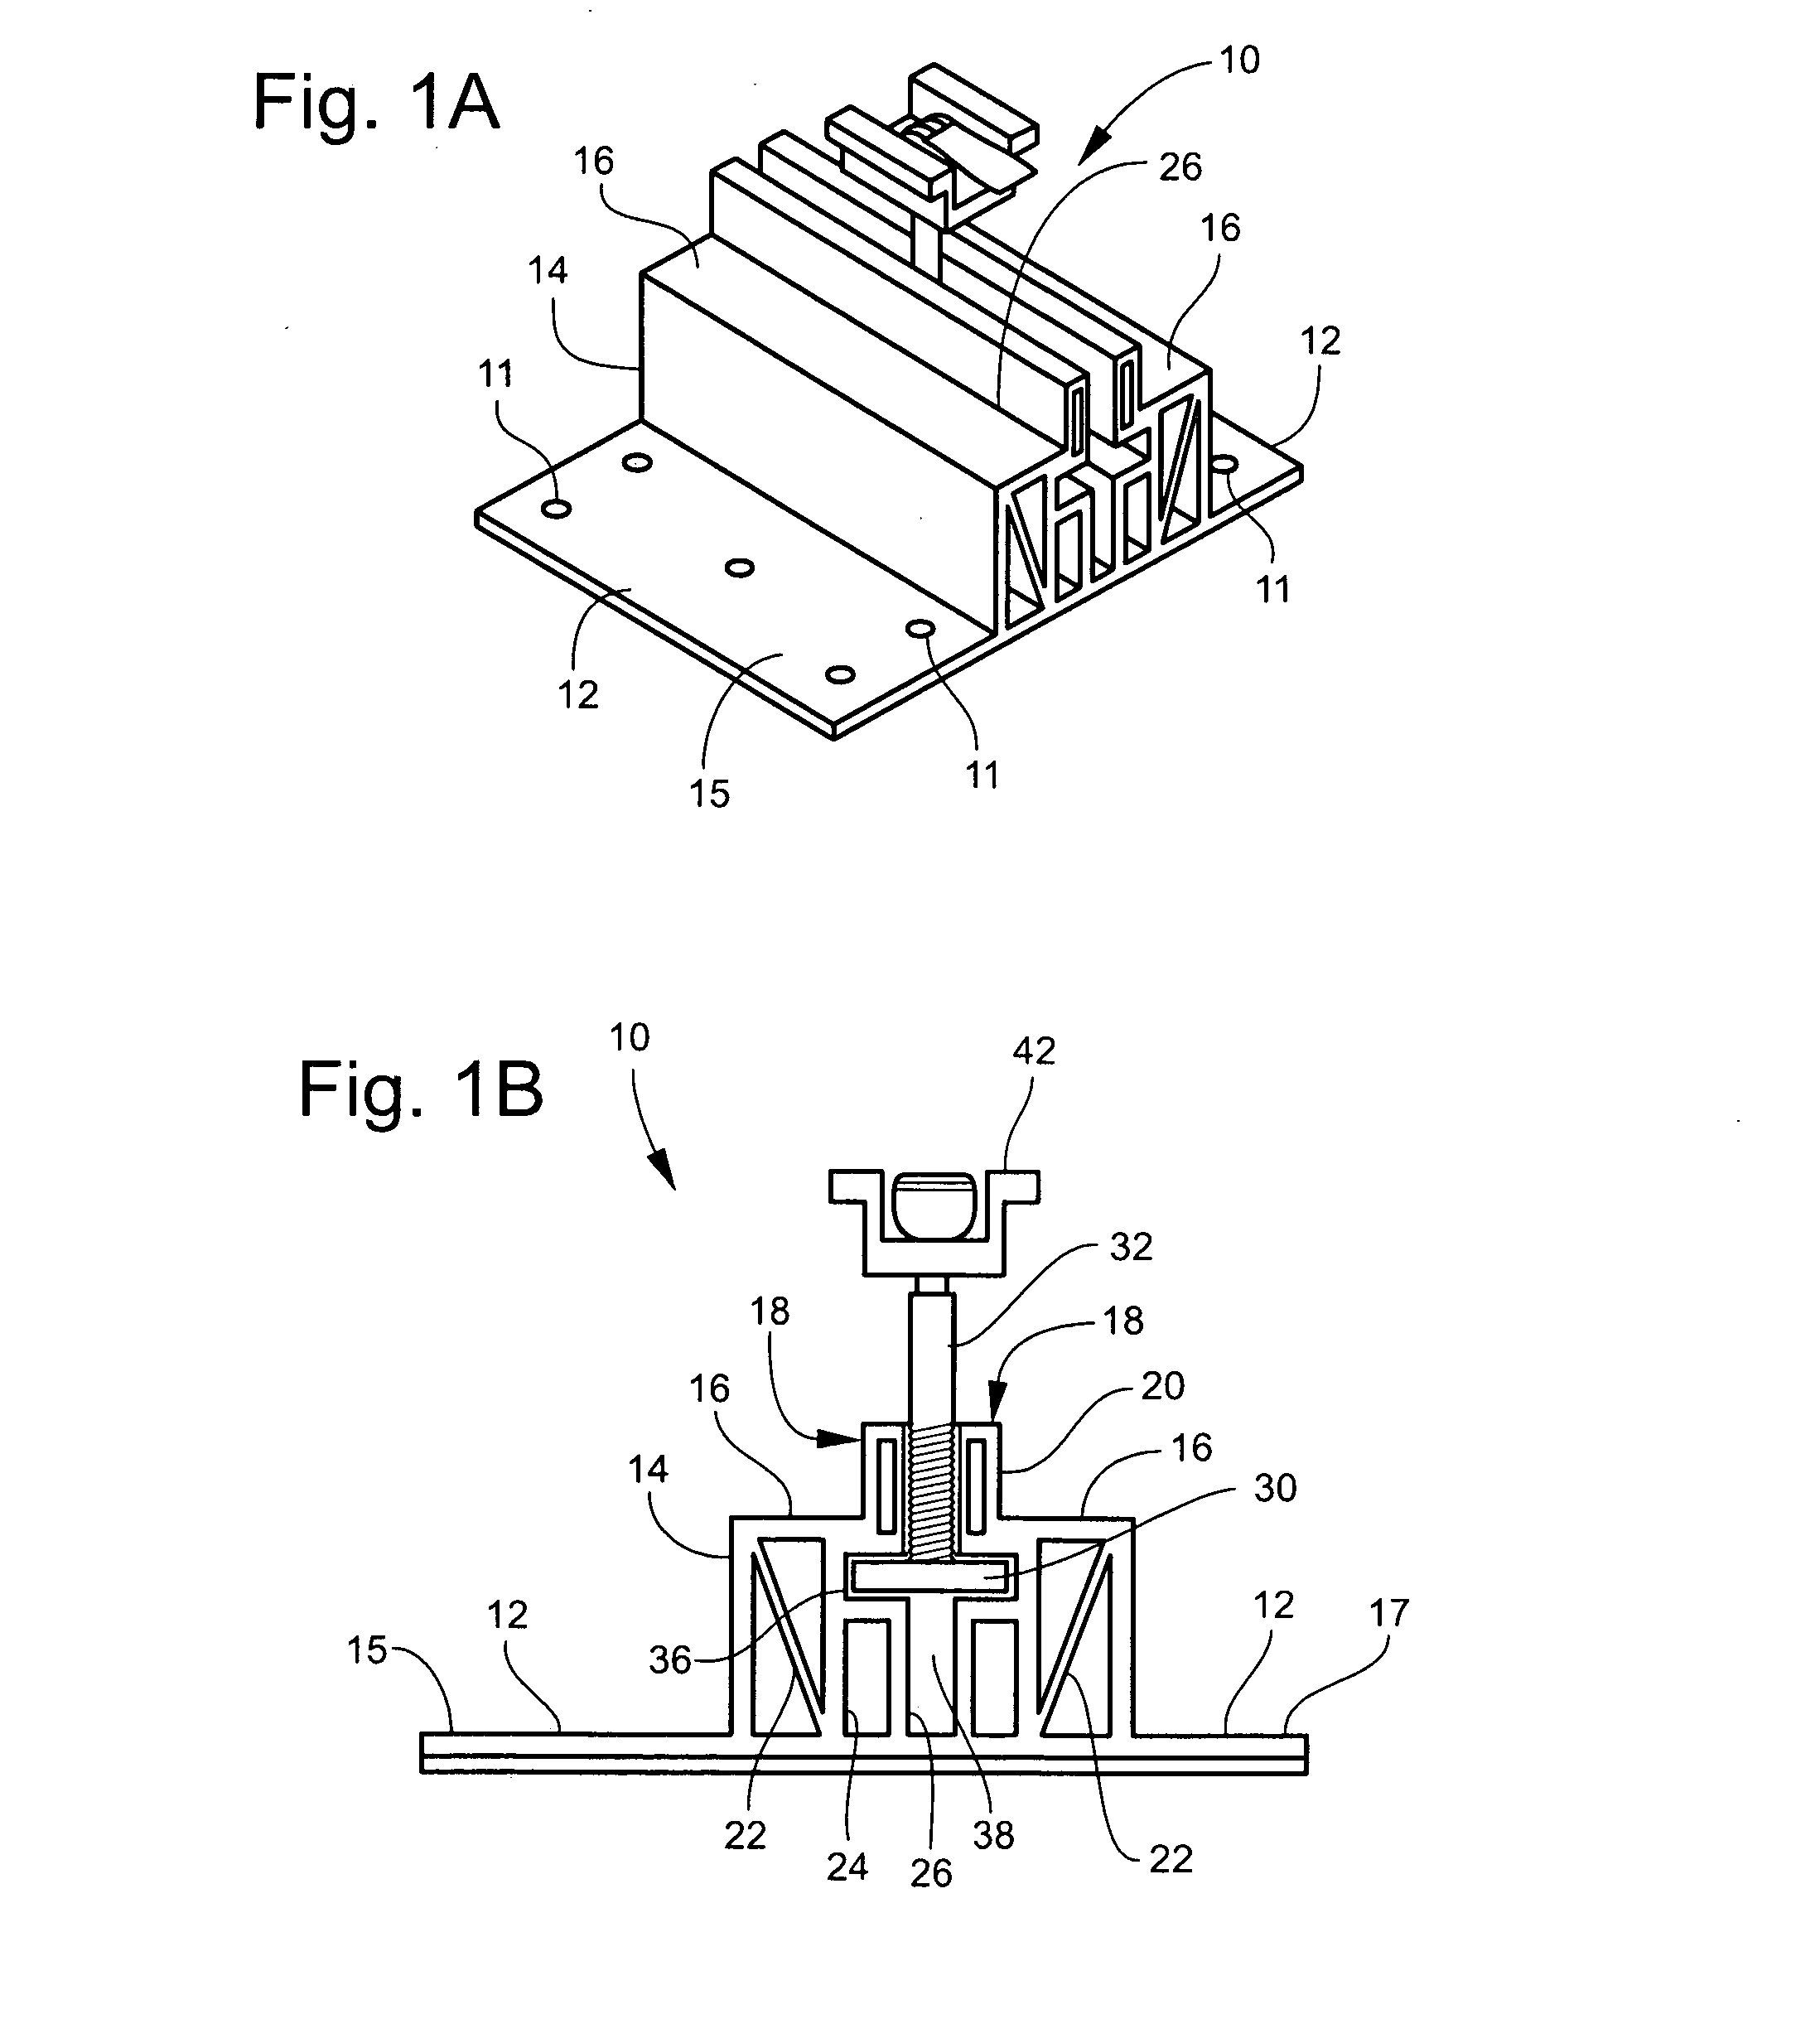 Mount for pitched roof and method of use